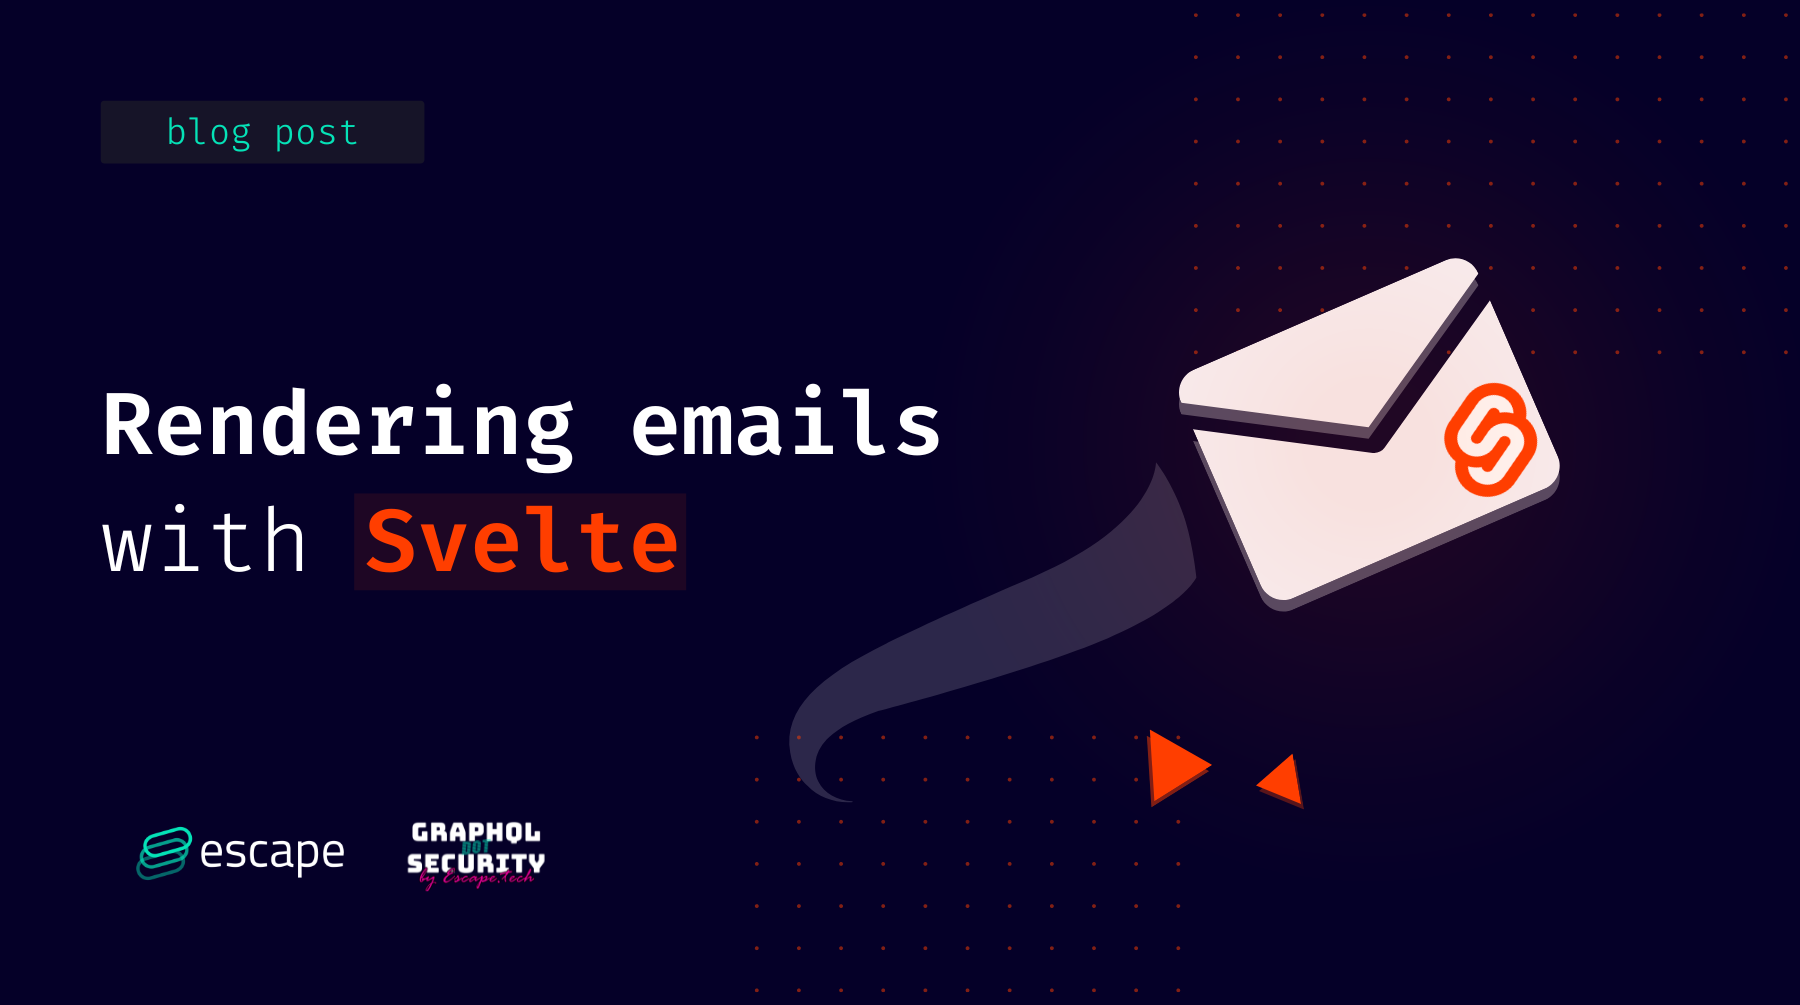 Rendering emails with Svelte